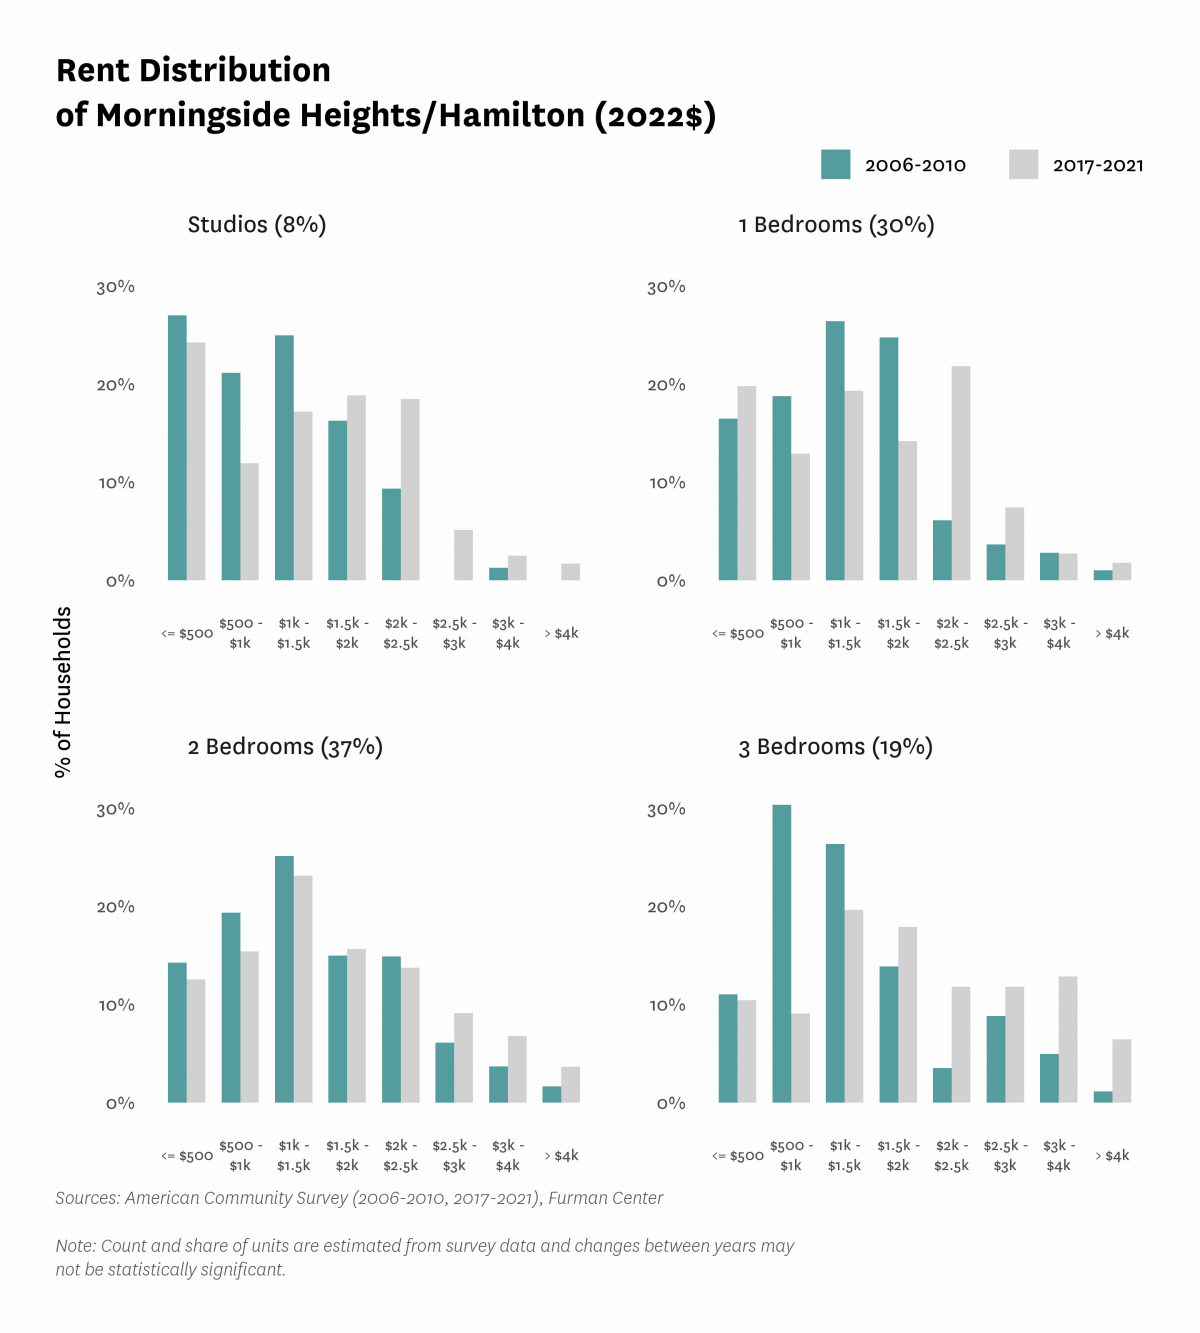 Graph showing the distribution of rents in Morningside Heights/Hamilton in both 2010 and 2017-2021.